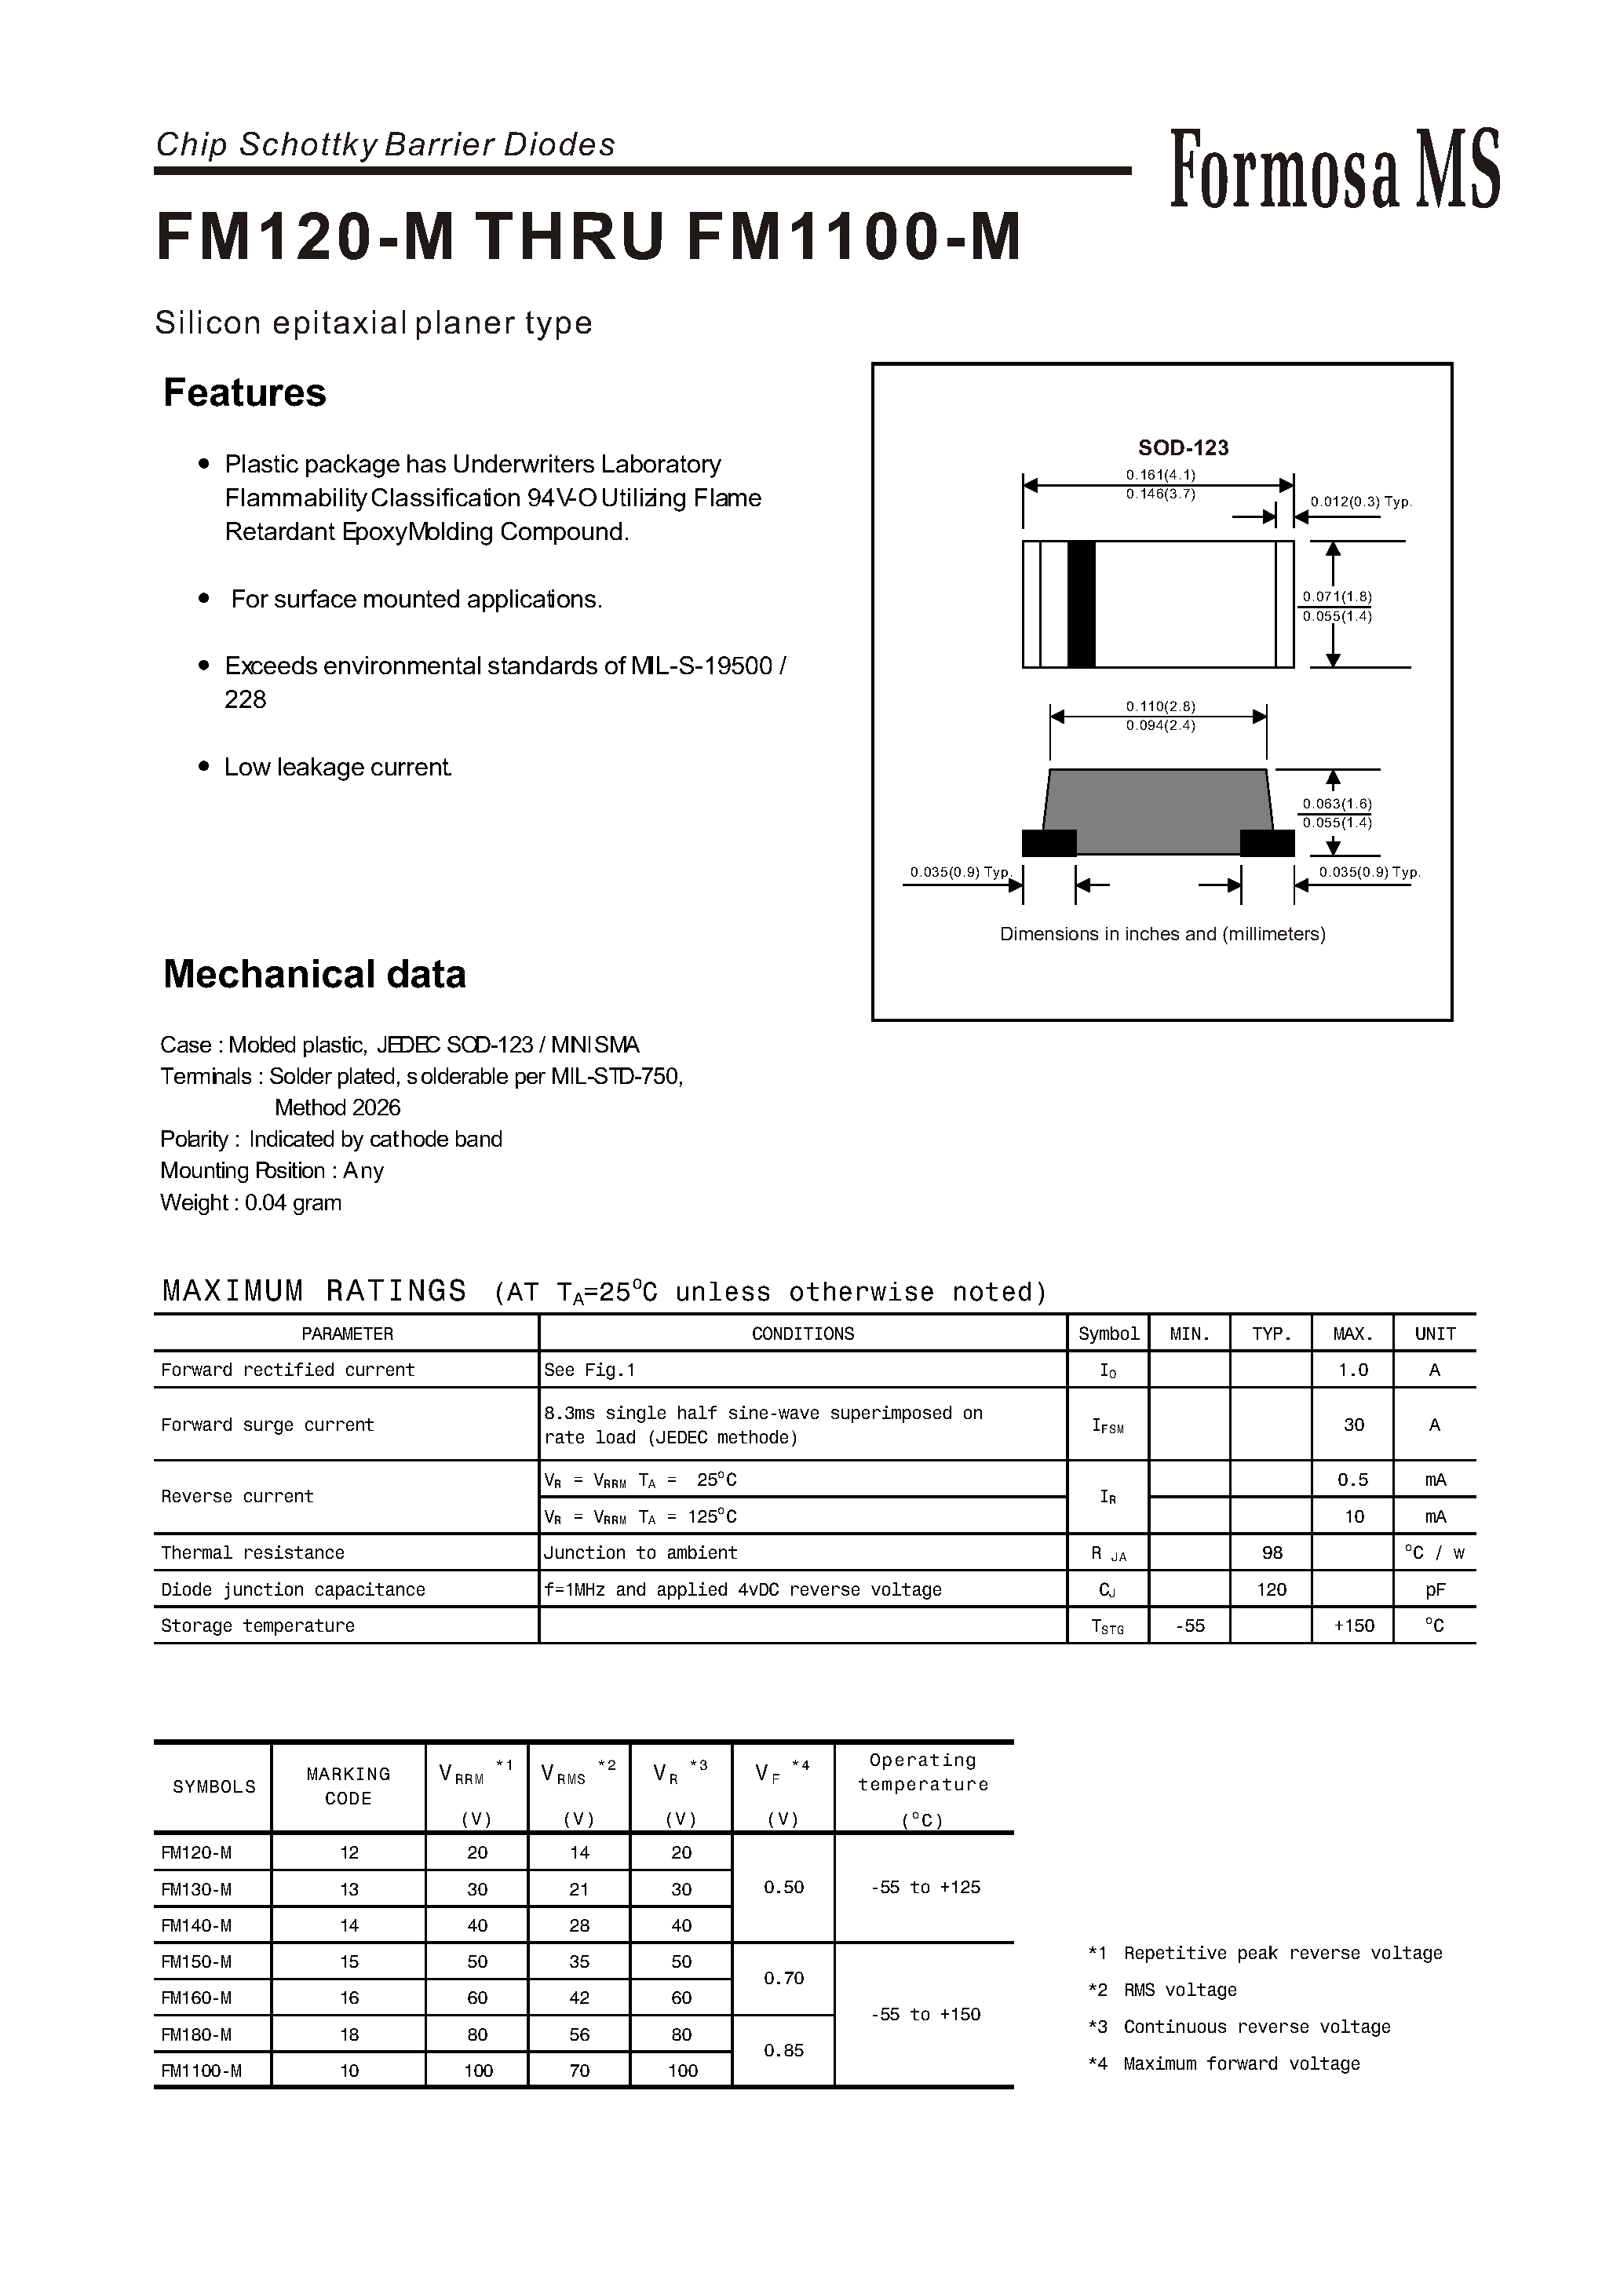 Datasheet FM140-M - Silicon epitaxial planer type page 1